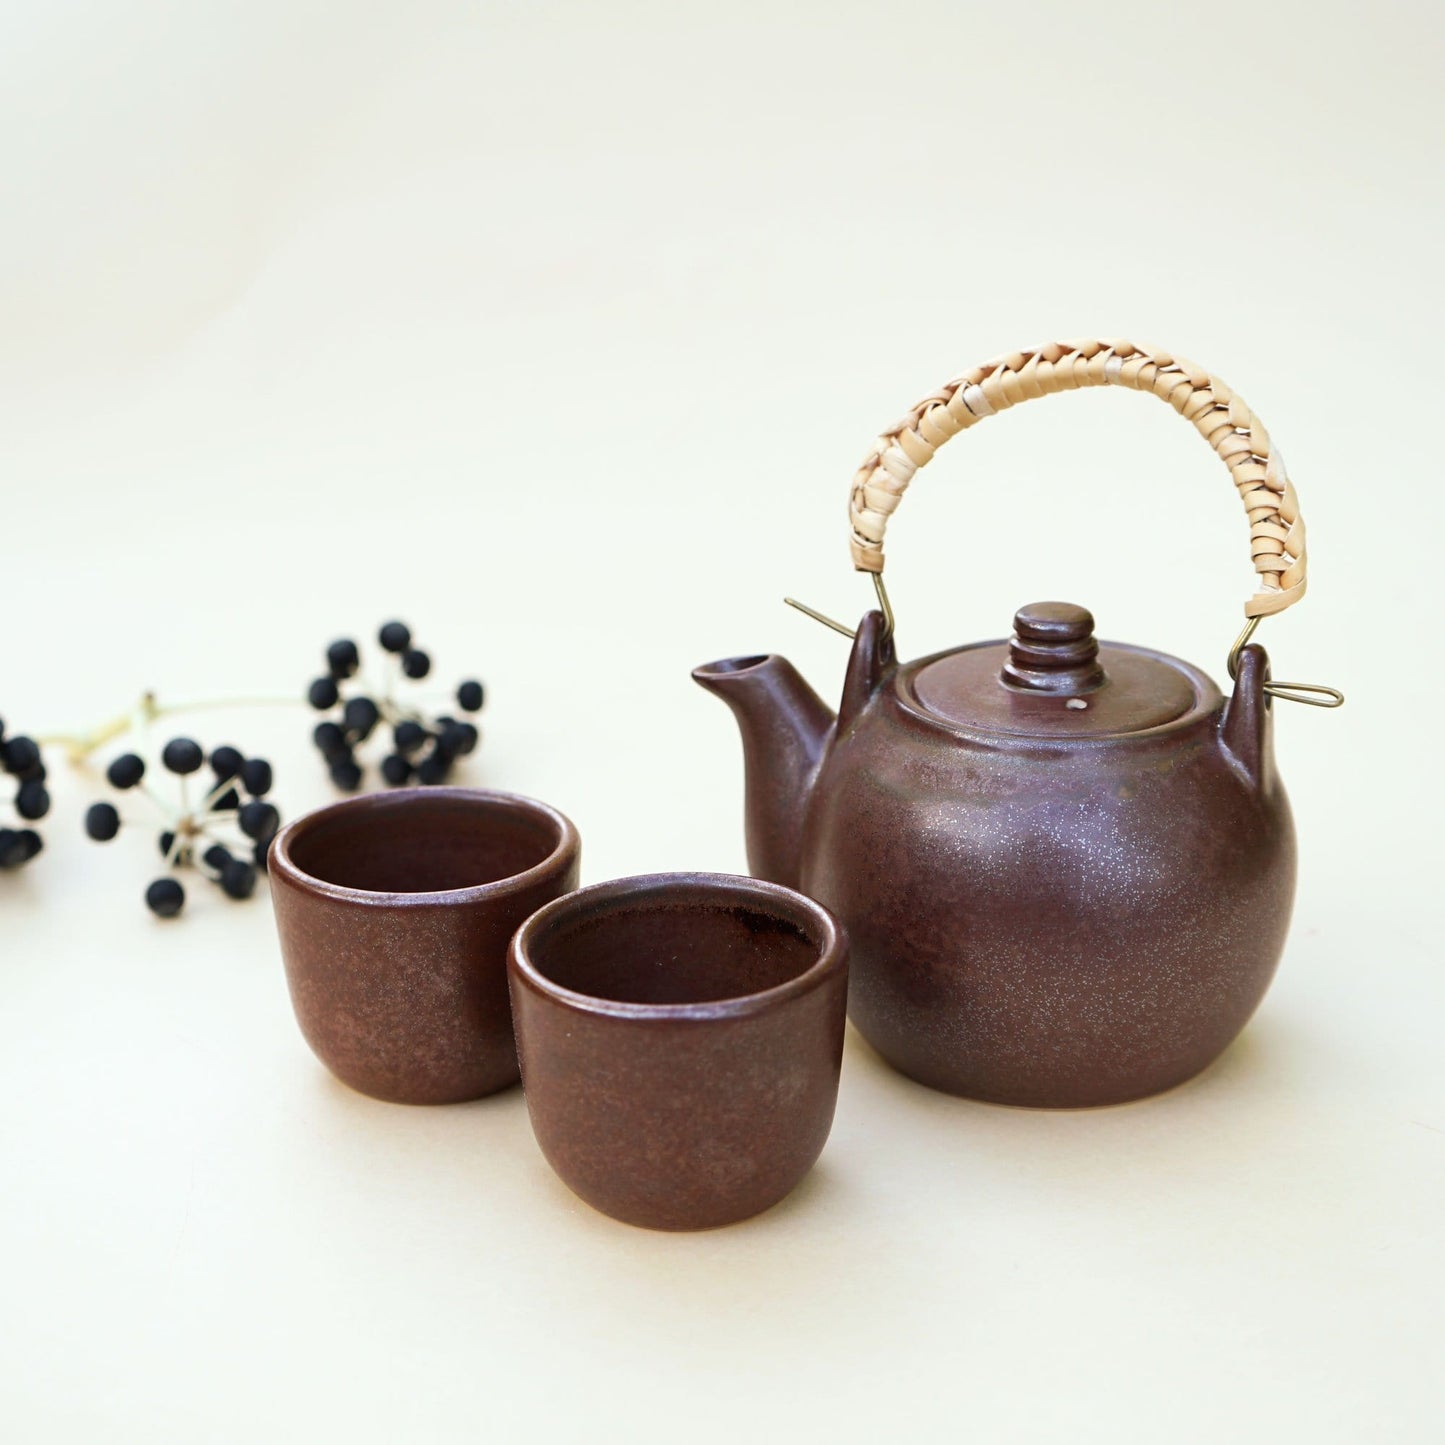 Handmade Chinese Teapot Set with 2 Cups - ShopGreenToday